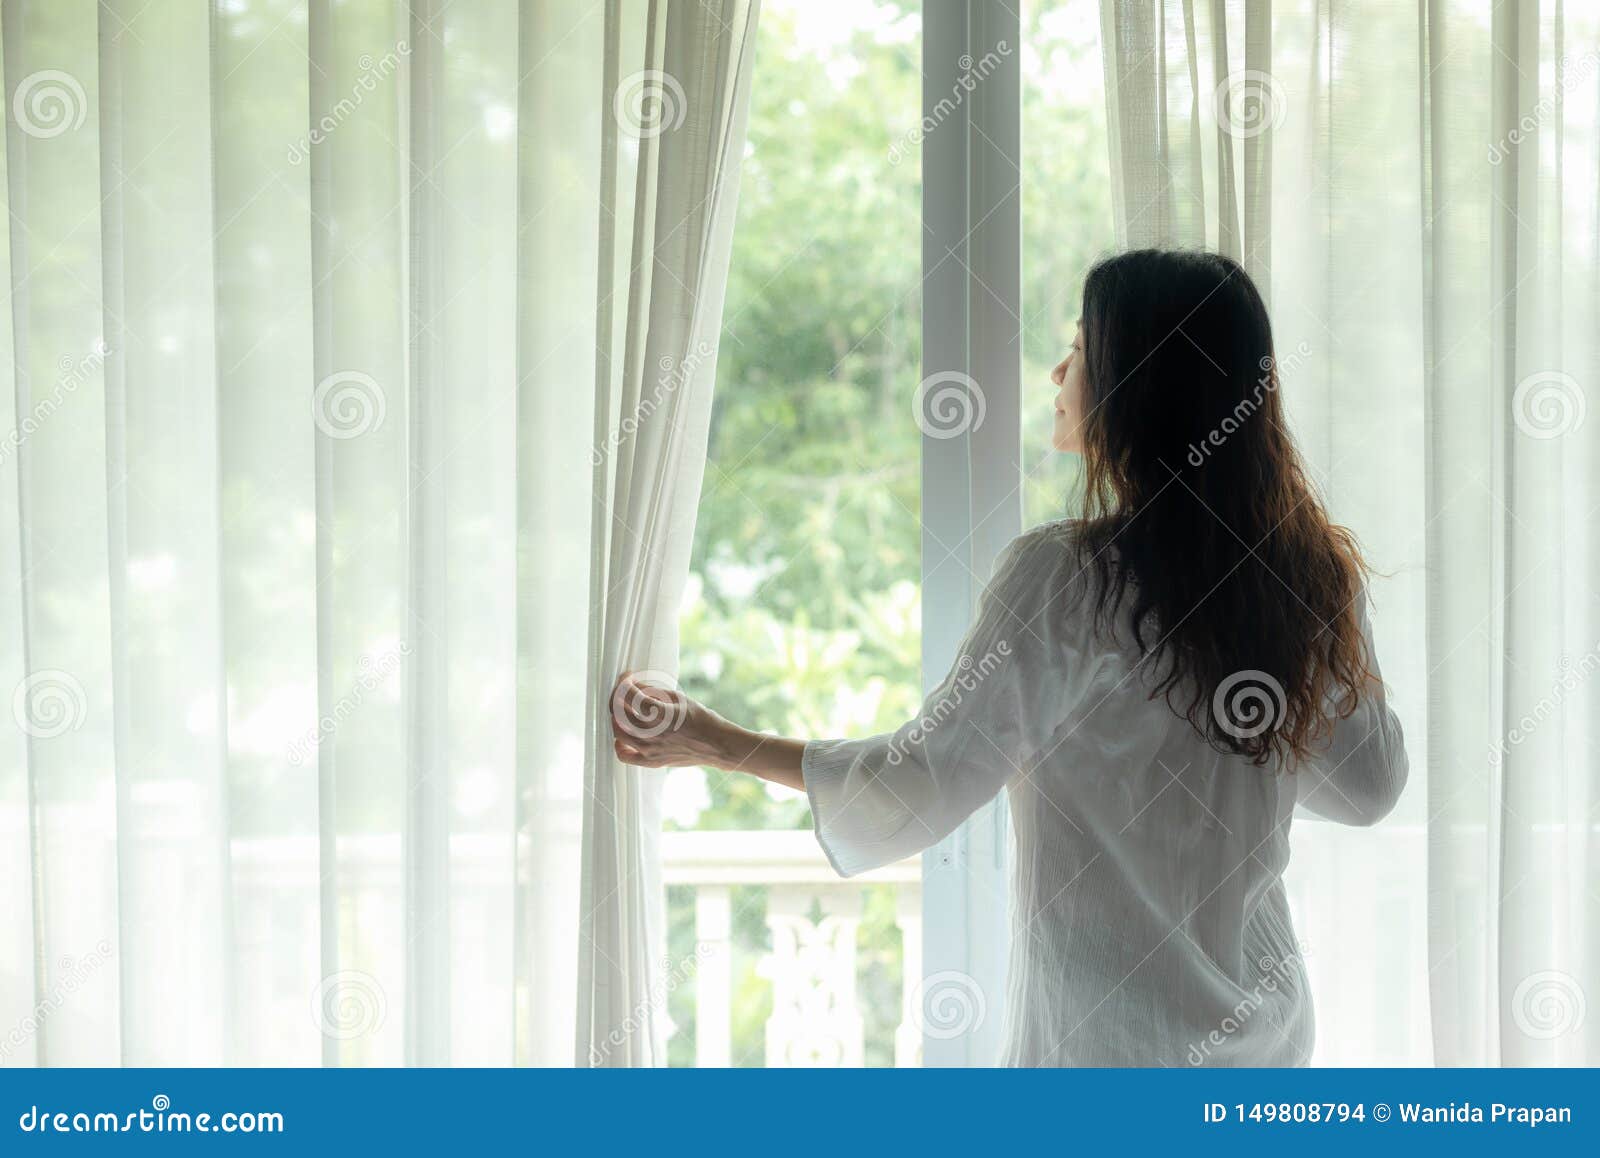 Lifestyle Women Open Window After Get Up The White Bed In Morning ... Open Window At Morning